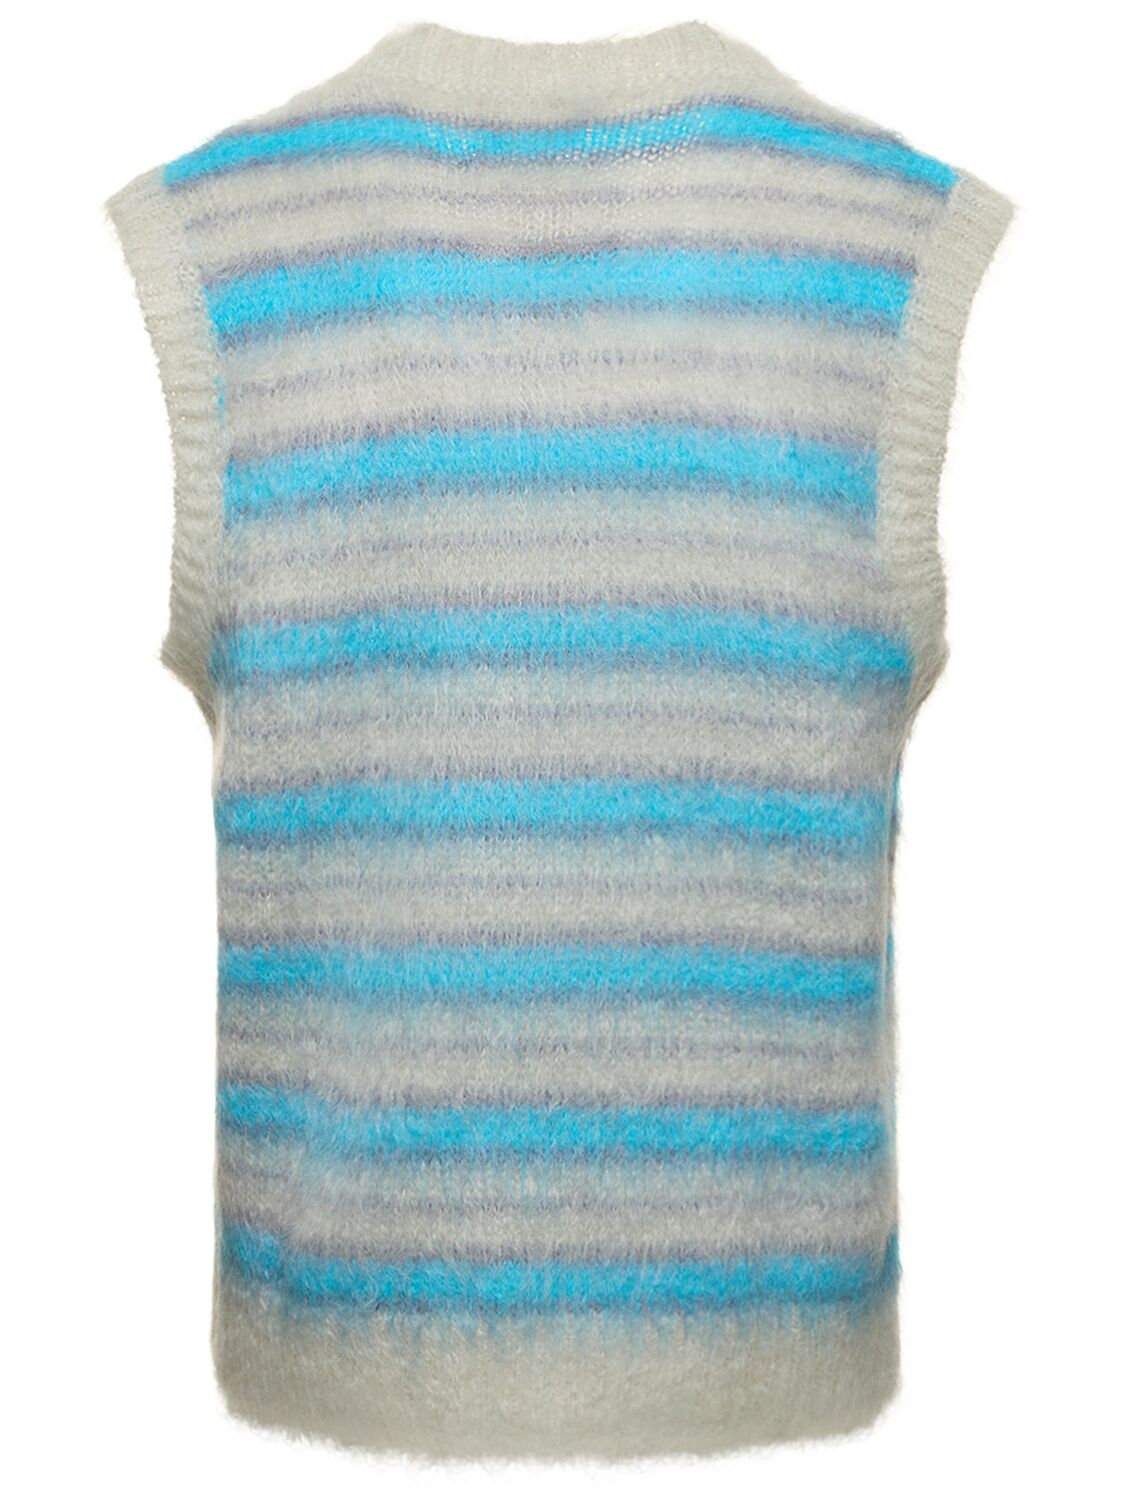 Shop Marni Iconic Brushed Mohair Blend Knit Vest In Blue,grey